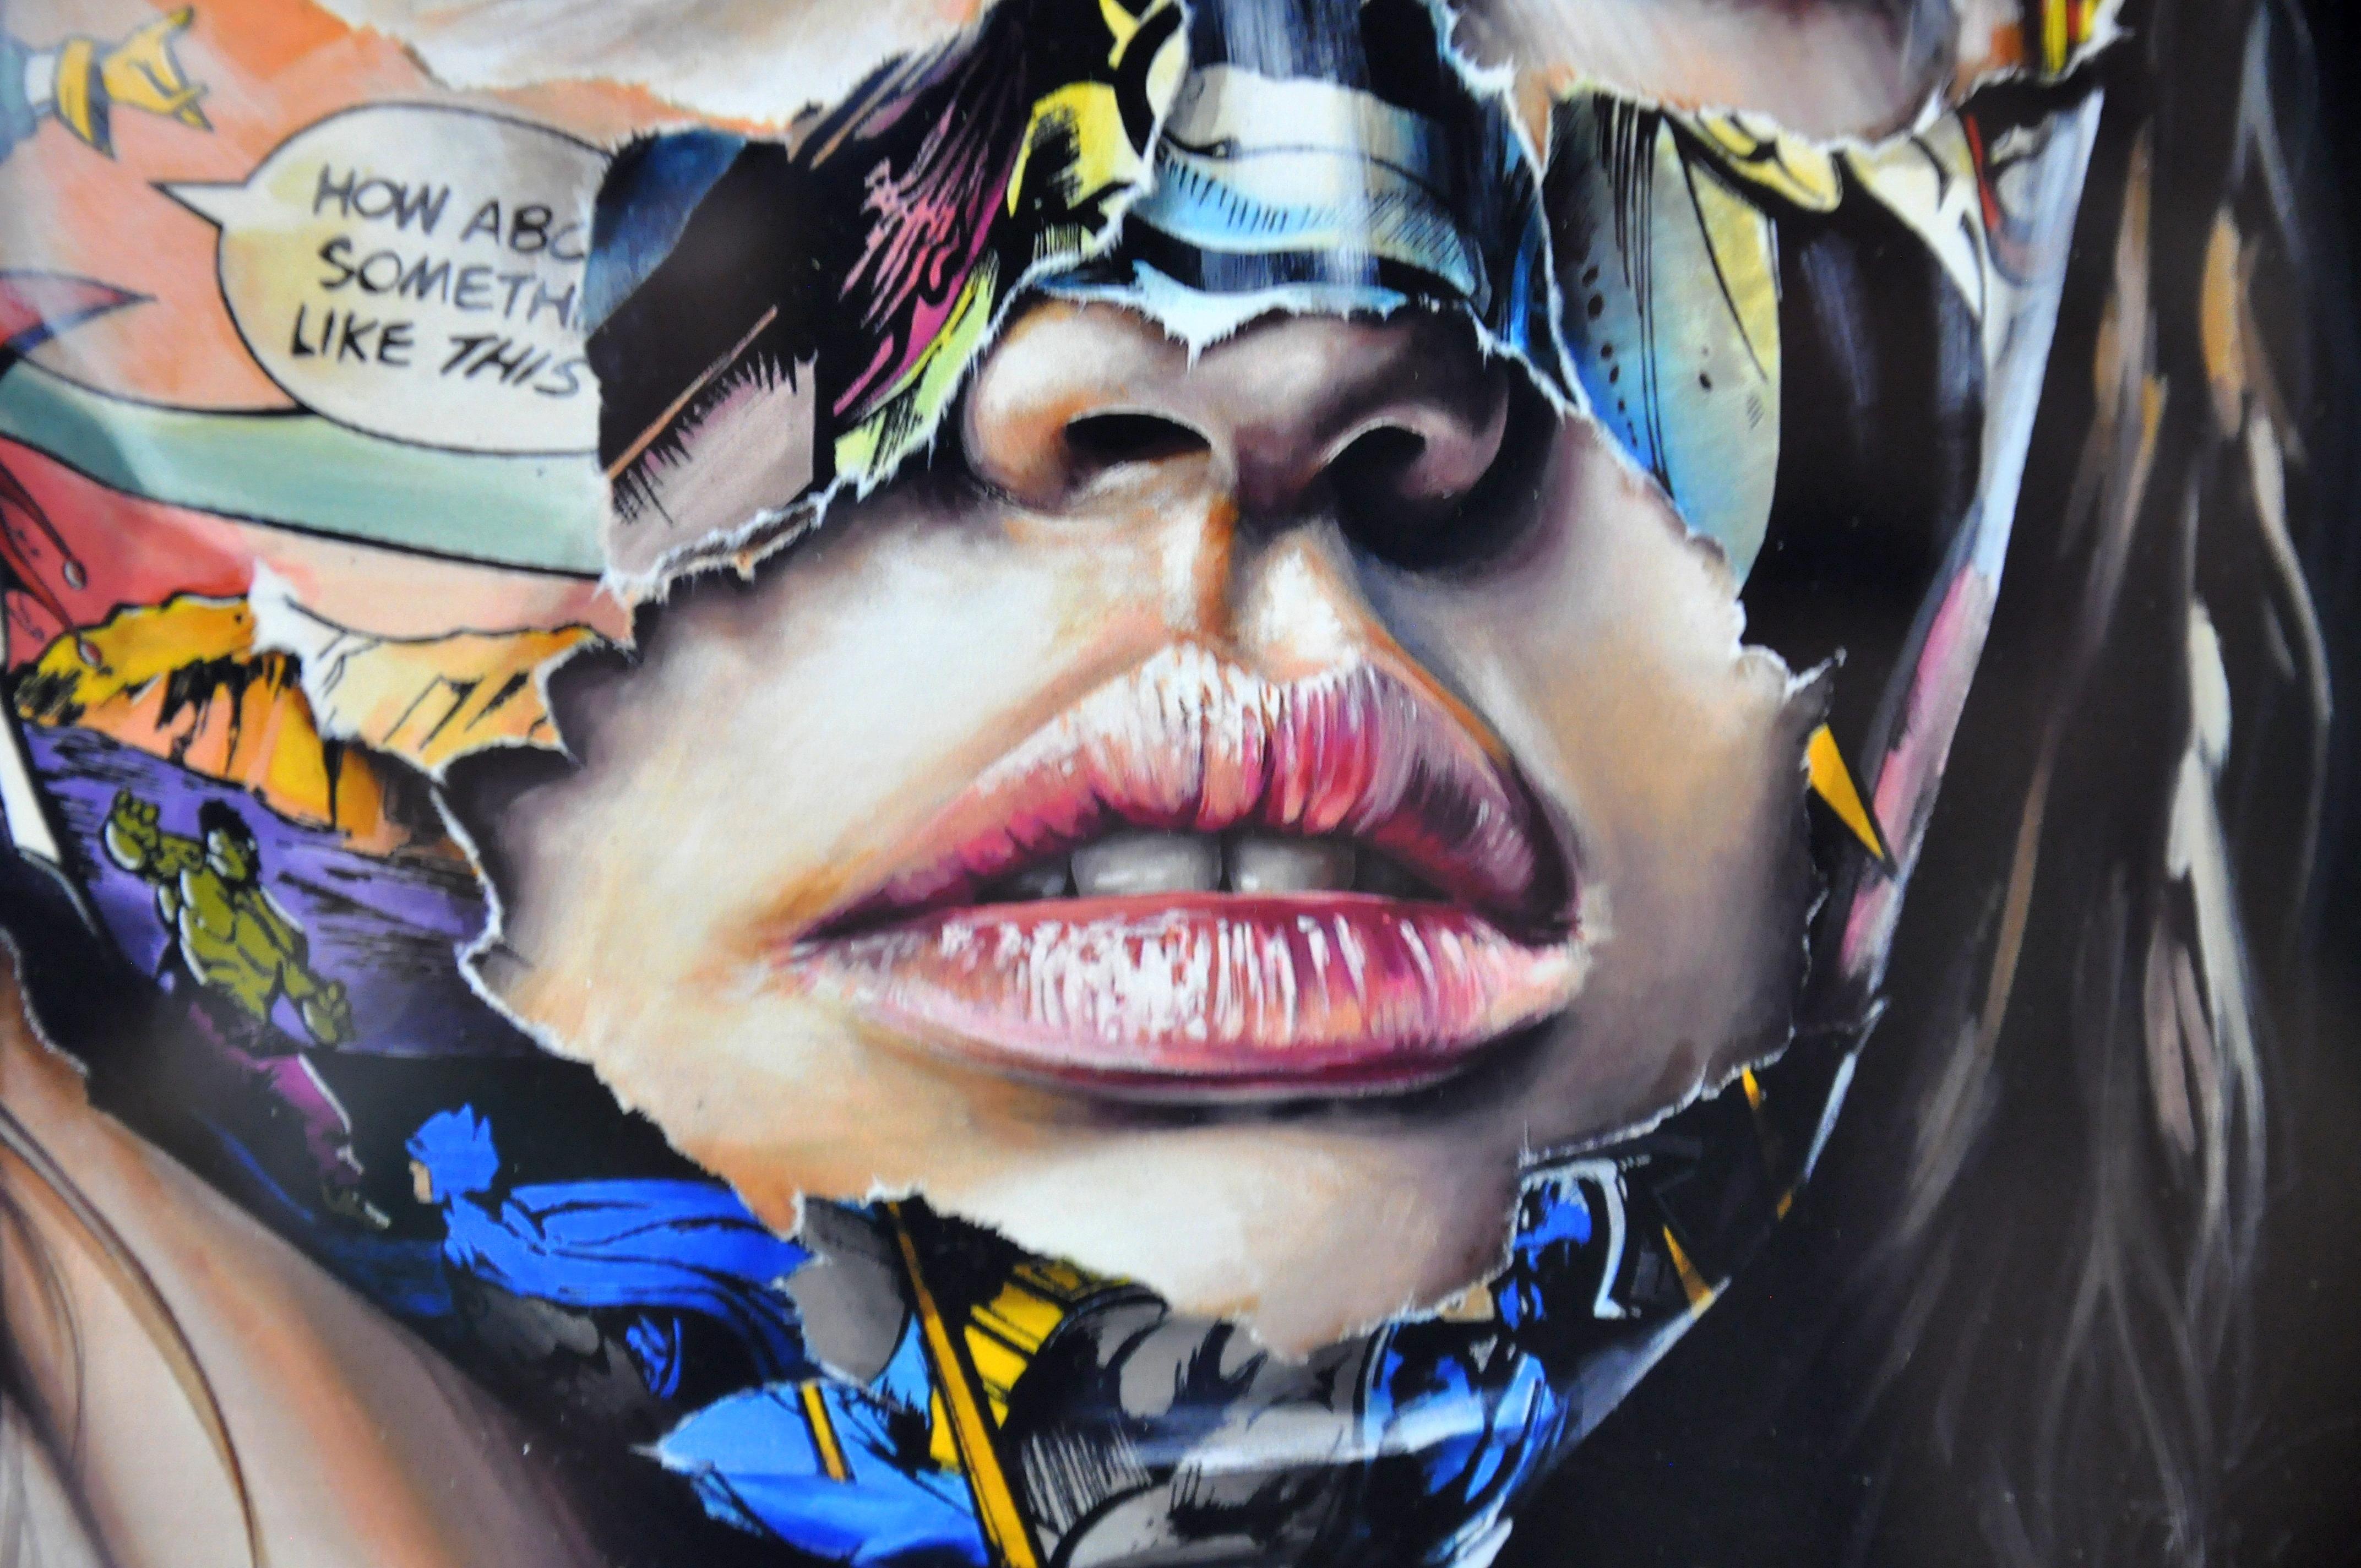 Limited edition art print by Canadian artist Sandra Chevrier, from an edition of 100. Professionally framed in a white shadowbox frame; unframed size 9 in x 11 in.; depicting a woman's portrait with comic book collage on a black background.
Sandra